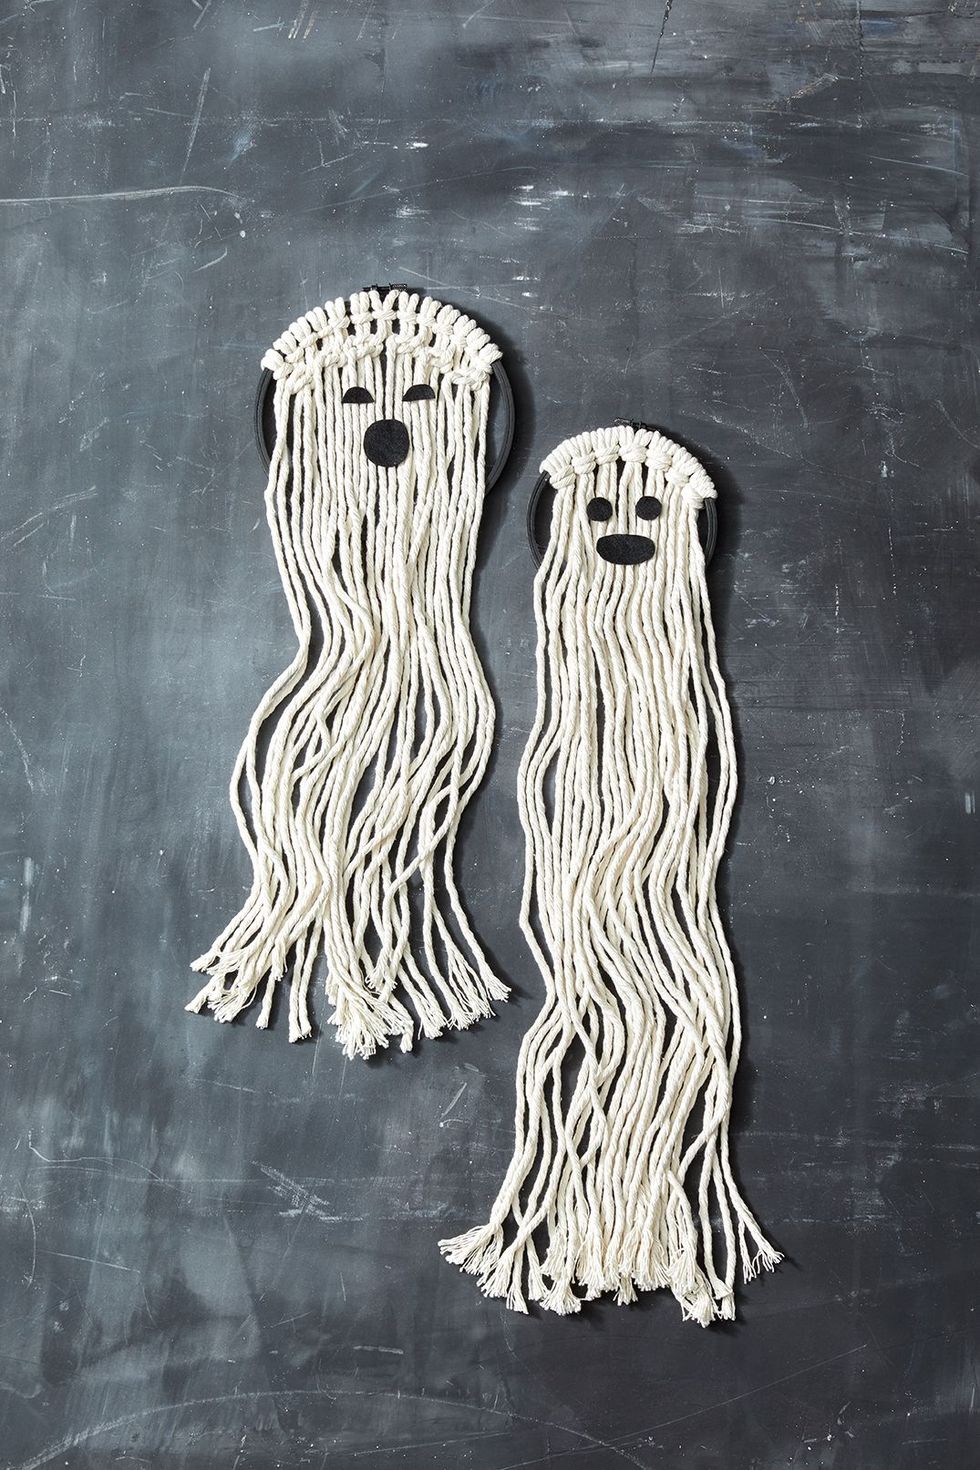 17 Halloween art projects for kids and adults - Gathered